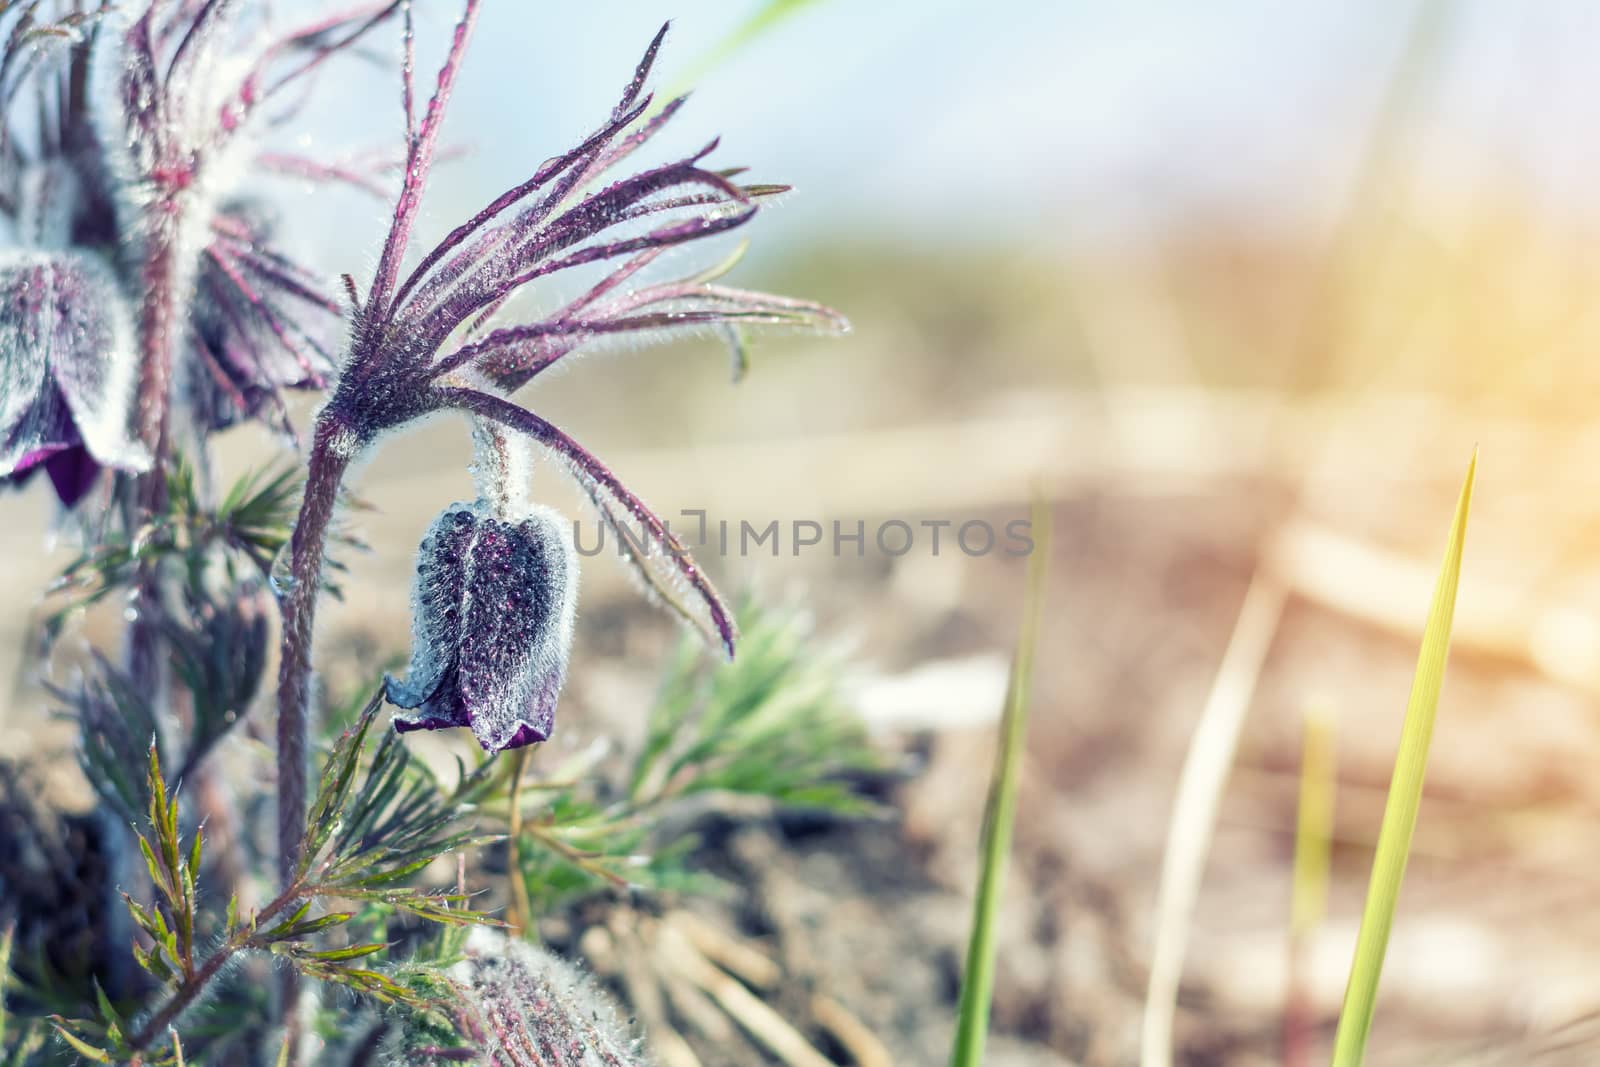 Beautiful spring violet flowers background. Eastern pasqueflower, prairie crocus, cutleaf anemone with water drops.Shallow depth of field. Toned. Copy space.